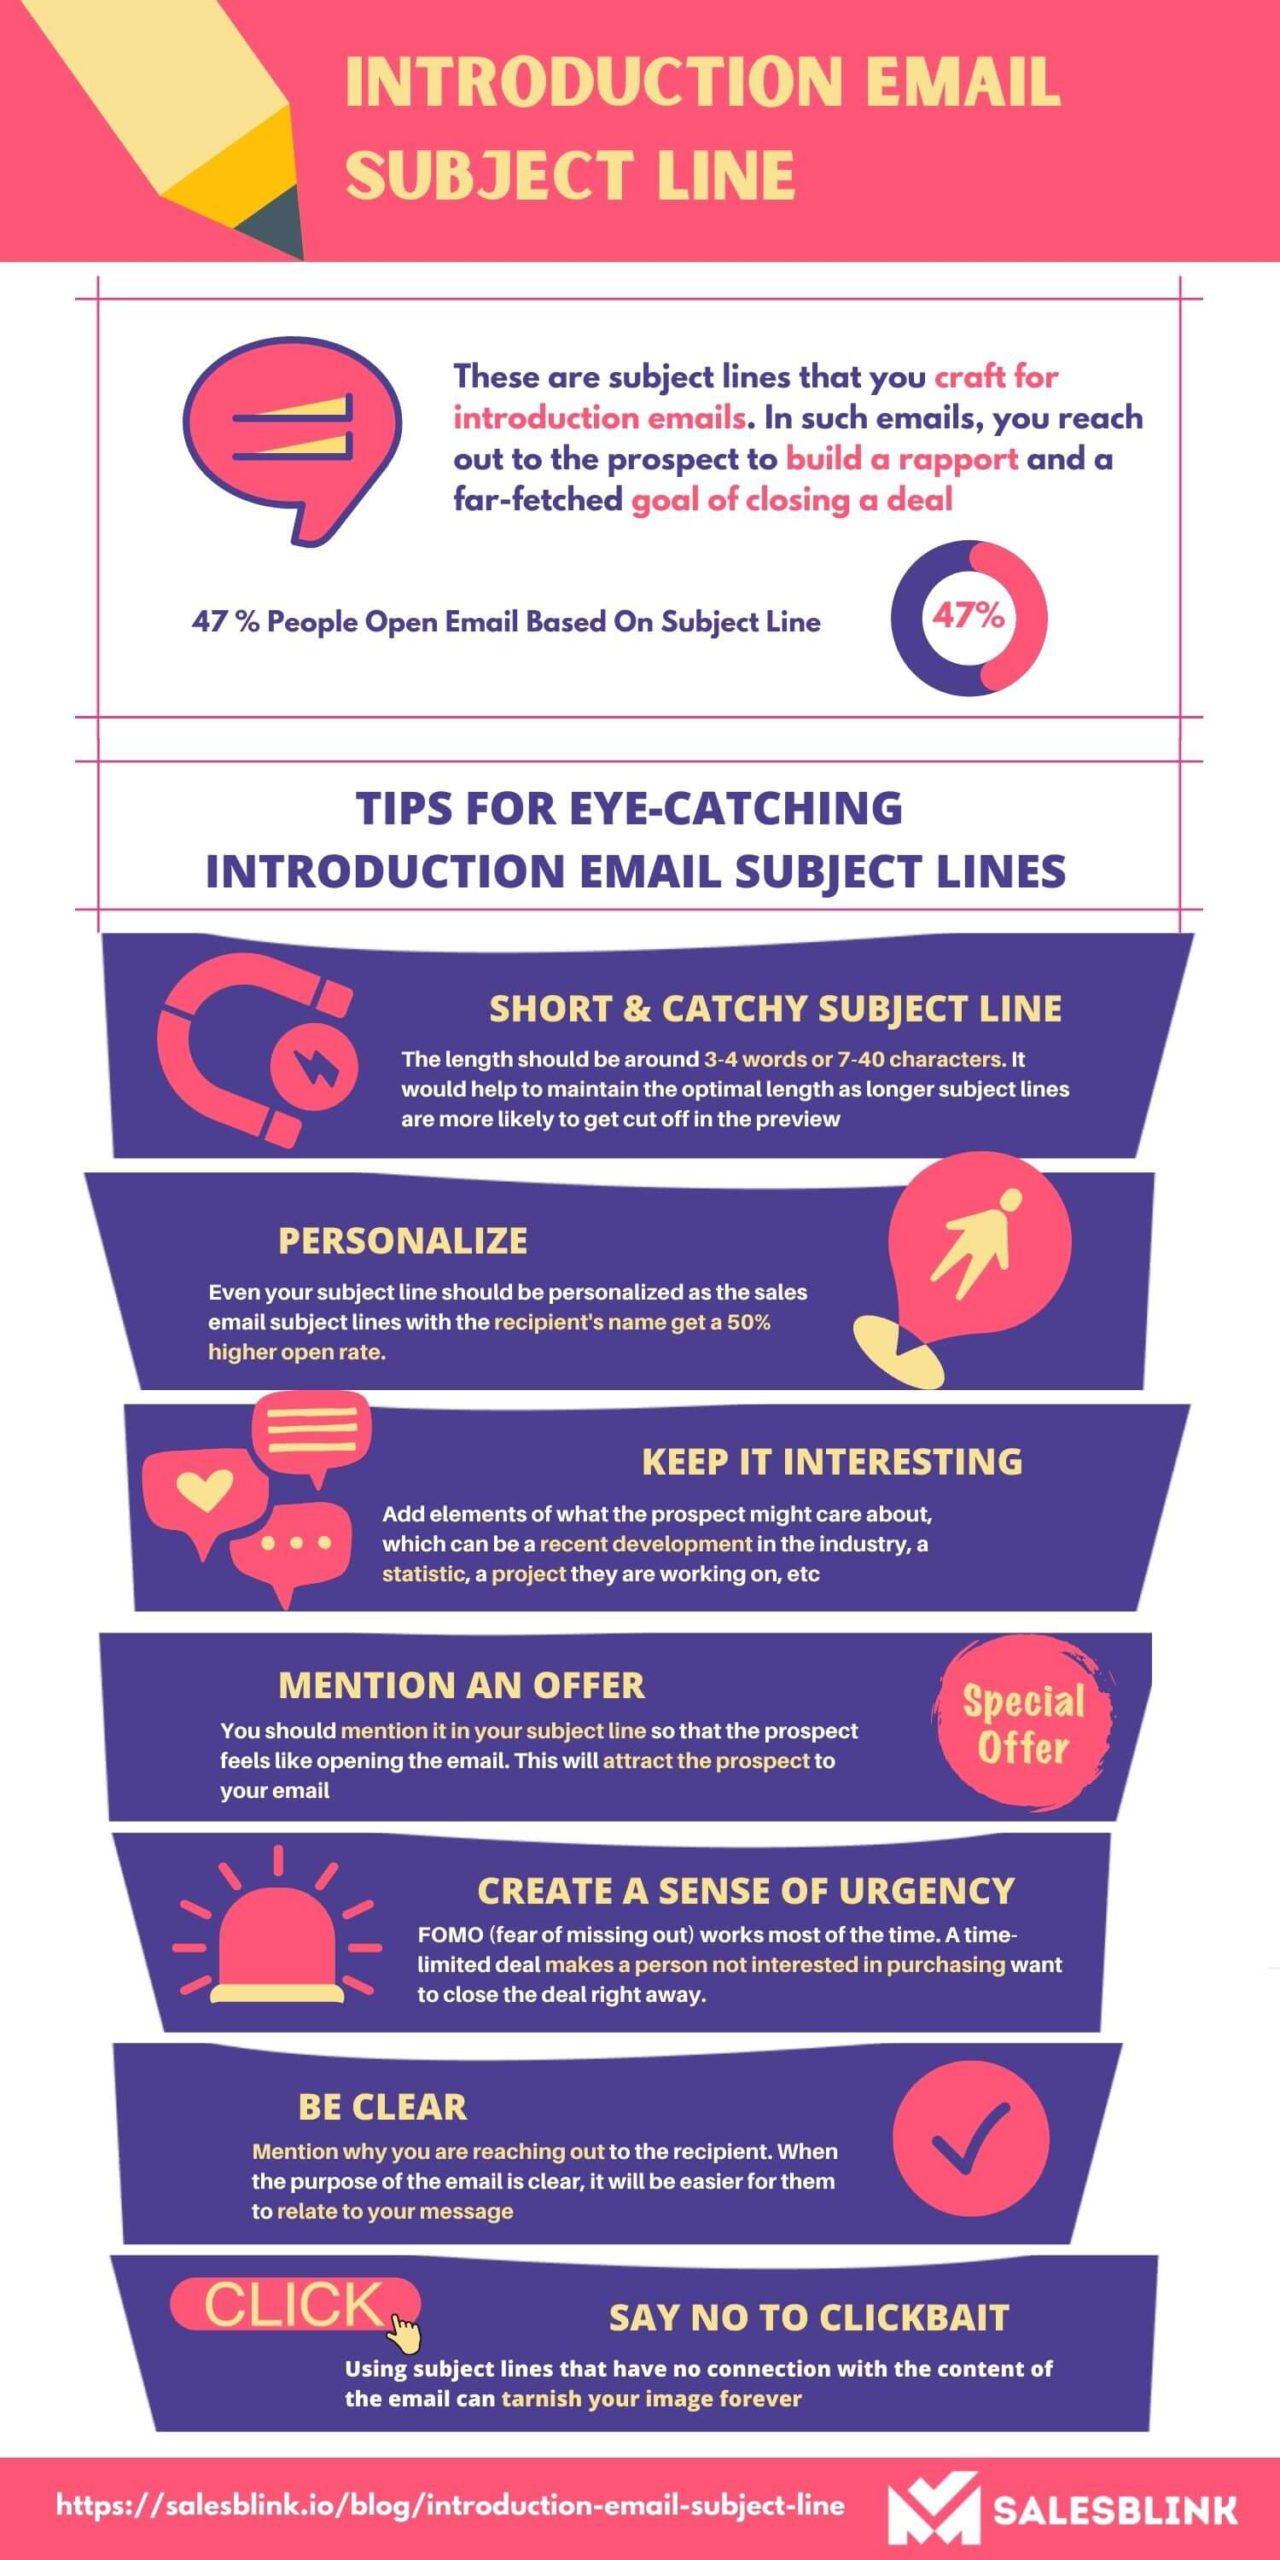 Introduction Email Subject Line - Infographic 